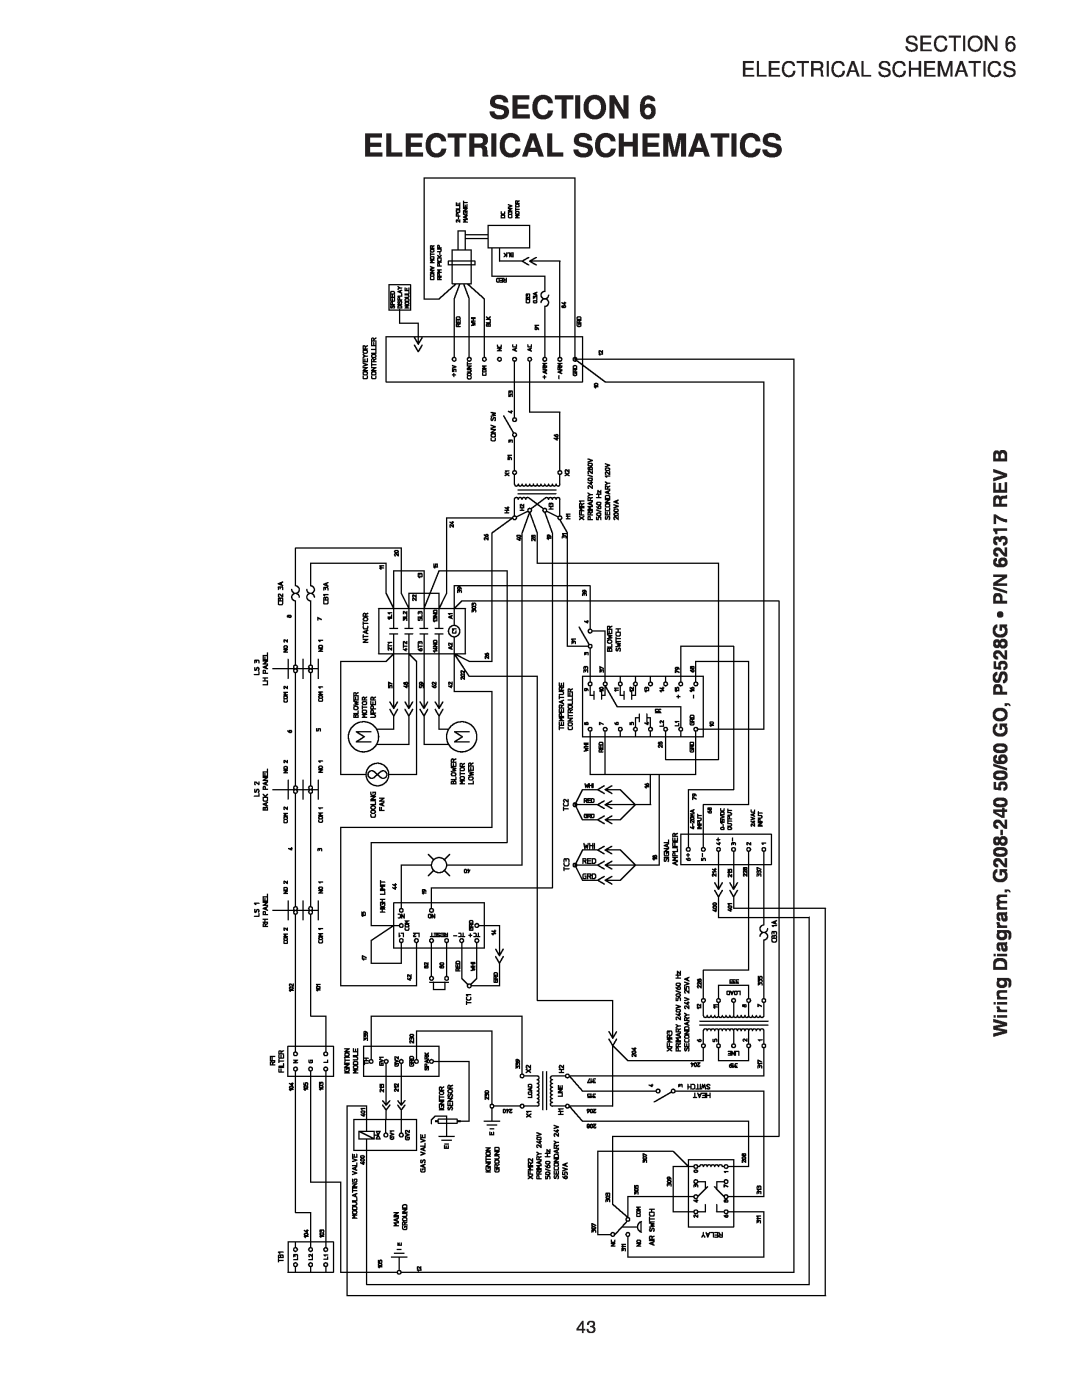 Middleby Marshall Section Electrical Schematics, Wiring Diagram, G208-240 50/60 GO, PS528G P/N 62317 REV B 